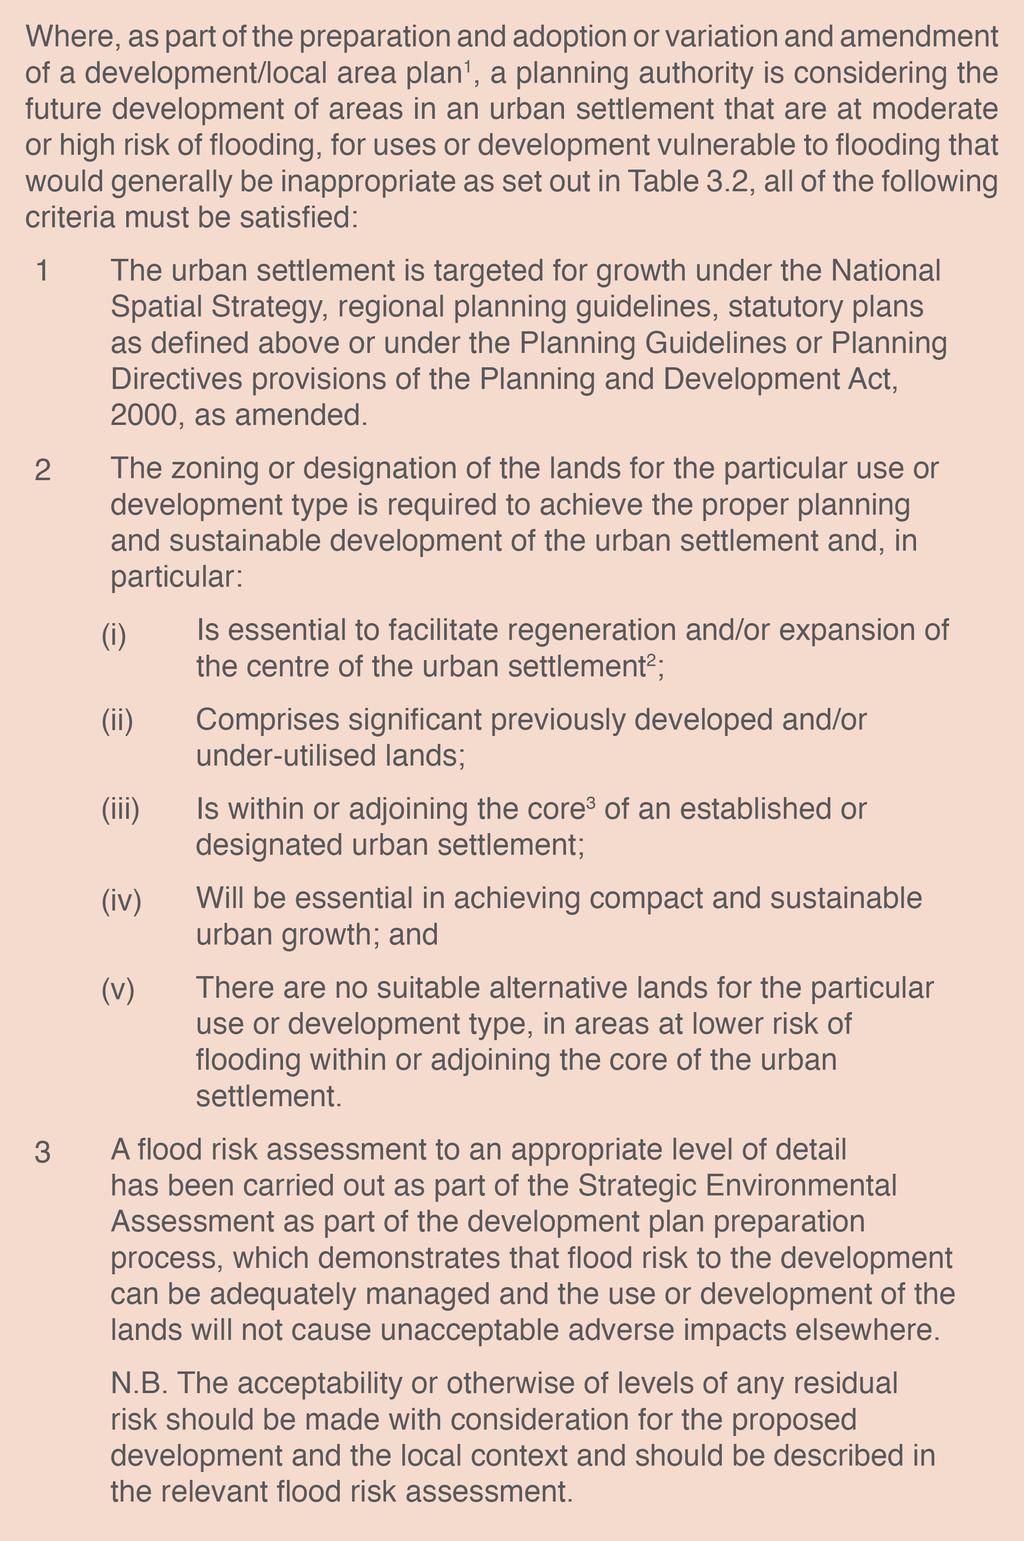 The Justification Test which is referred to as part of the Sequential Approach is an assessment of whether a development proposal within an area at risk of flooding meets specific criteria for proper